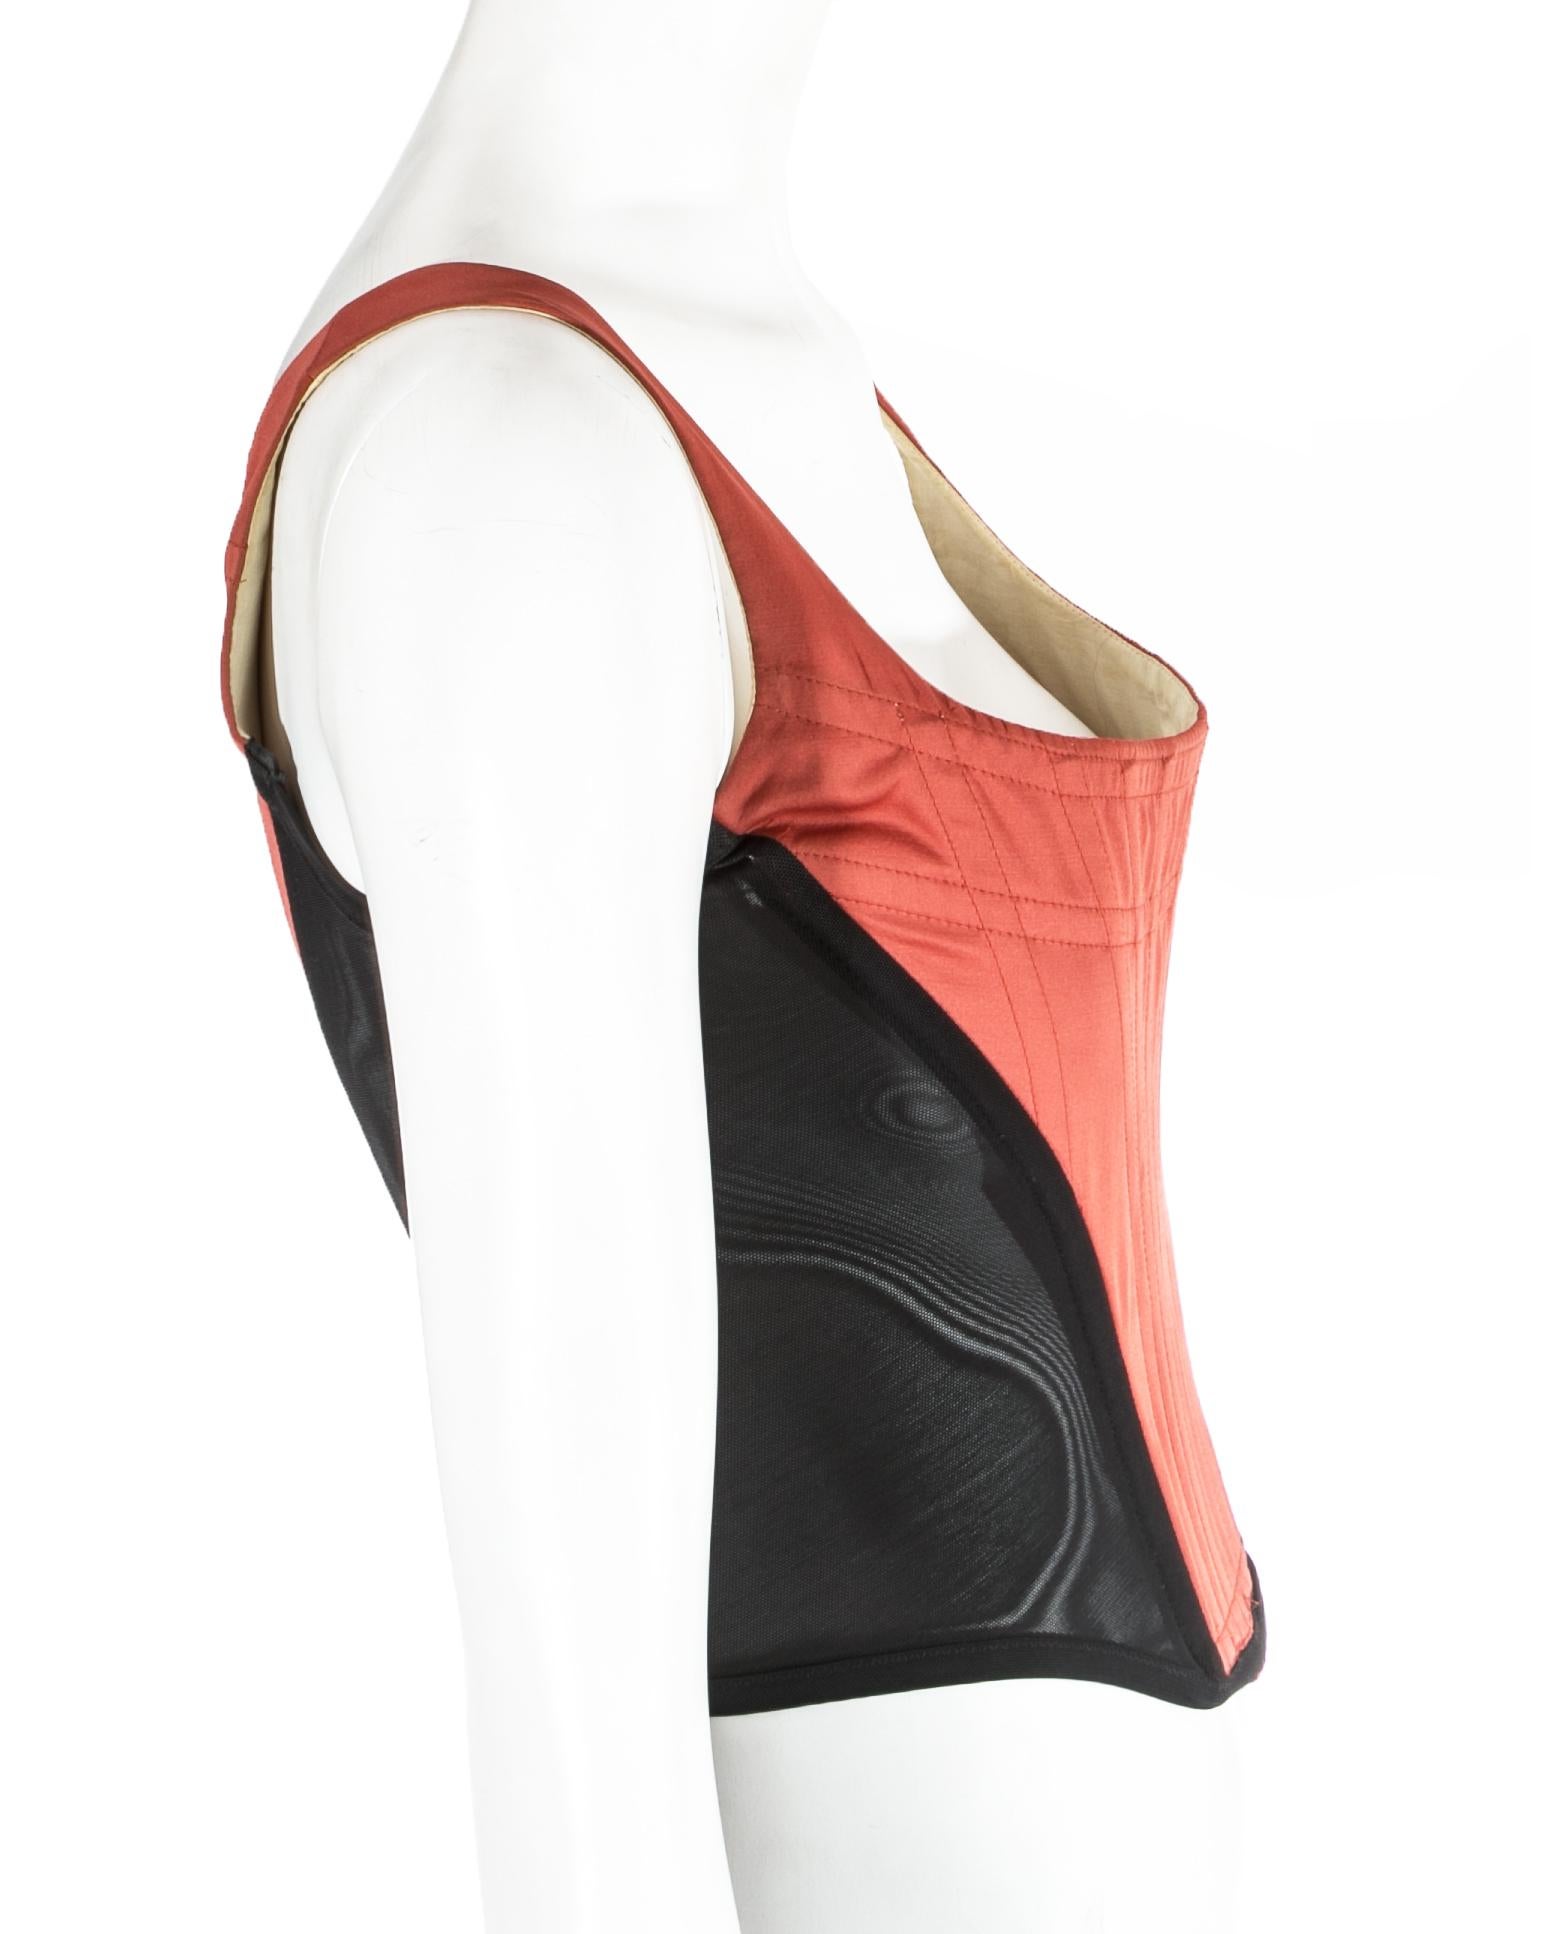 Women's Vivienne Westwood red and black boned corset, fw 1999